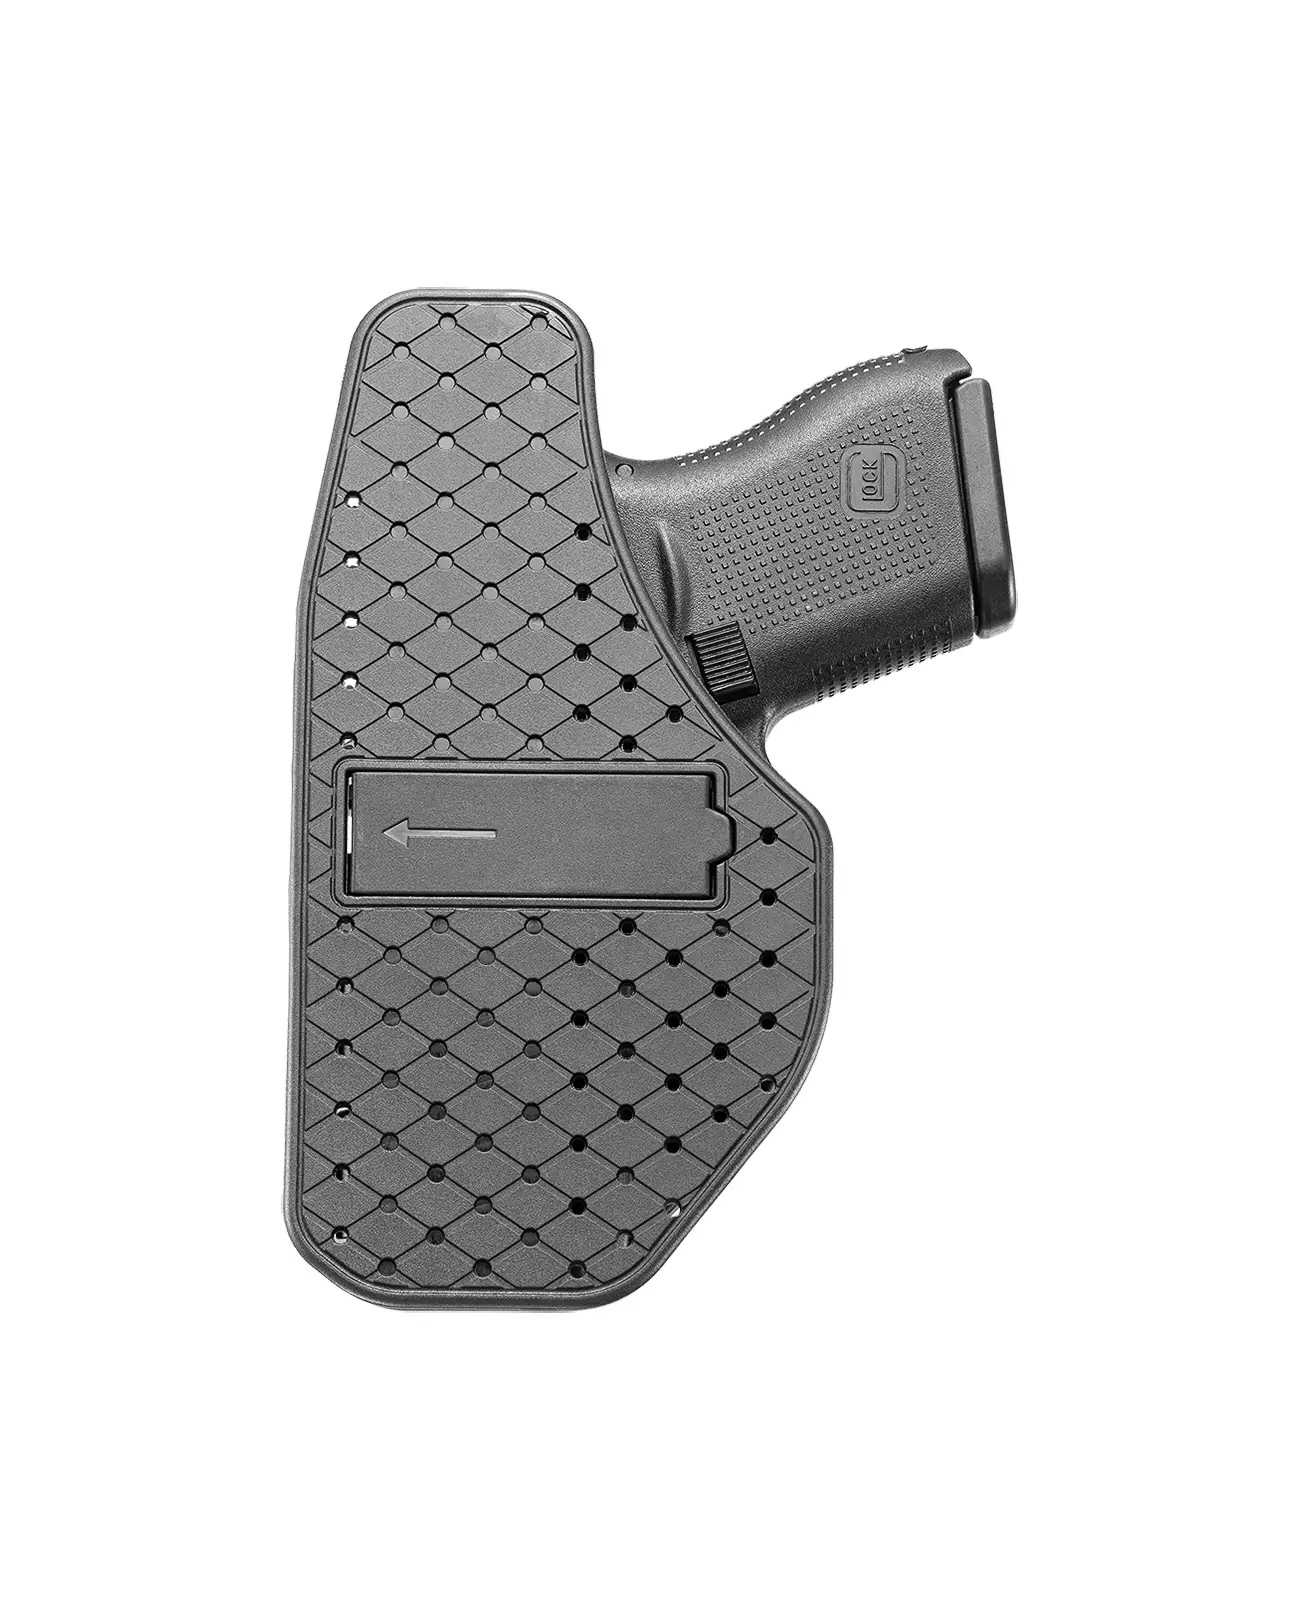 Fobus IWB and OWB Appendix Sig P365 Holster